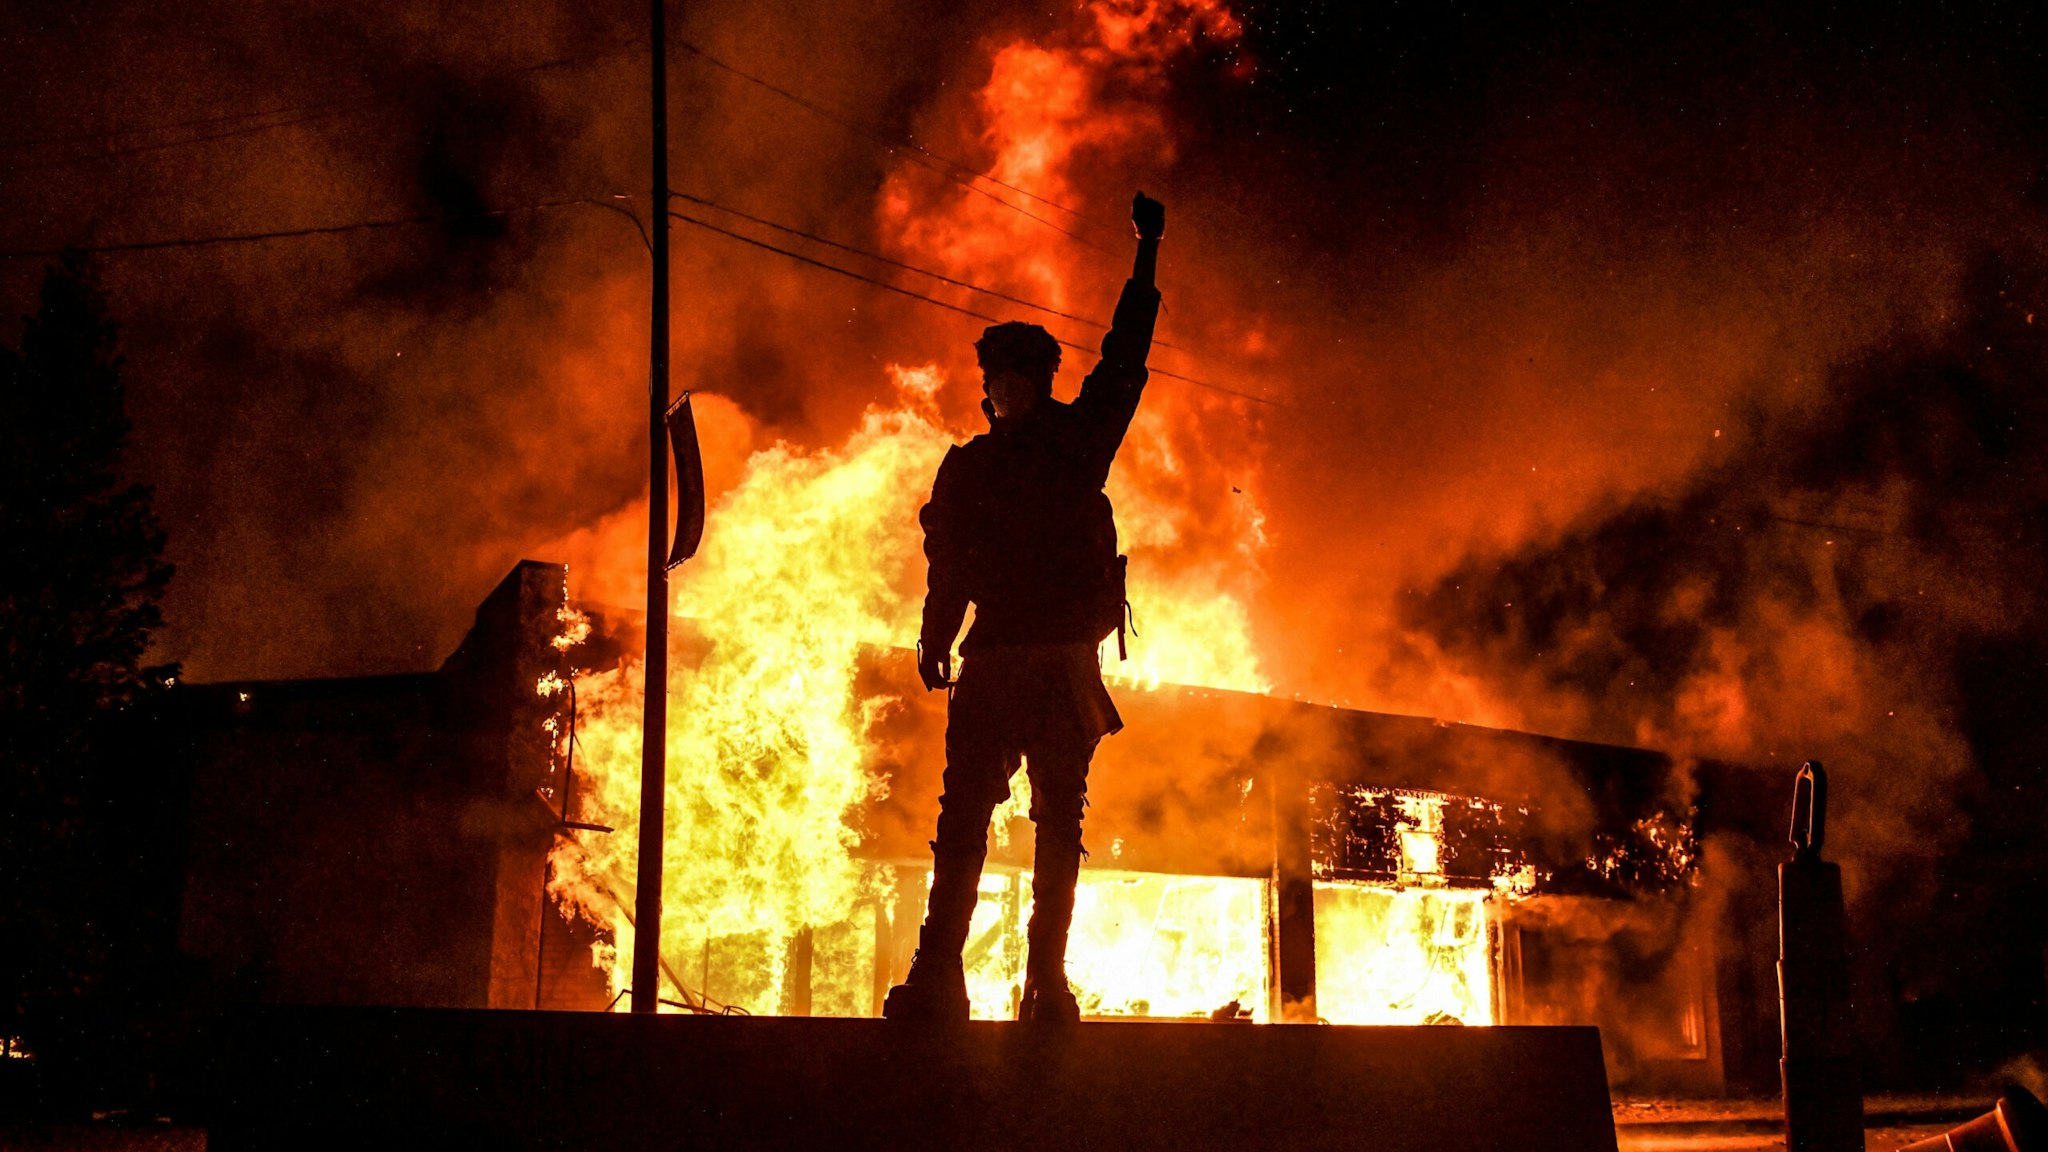 TOPSHOT - A protester reacts standing in front of a burning building set on fire during a demonstration in Minneapolis, Minnesota, on May 29, 2020, over the death of George Floyd, a black man who died after a white policeman kneeled on his neck for several minutes. - Violent protests erupted across the United States late on May 29 over the death of a handcuffed black man in police custody, with murder charges laid against the arresting Minneapolis officer failing to quell seething anger.